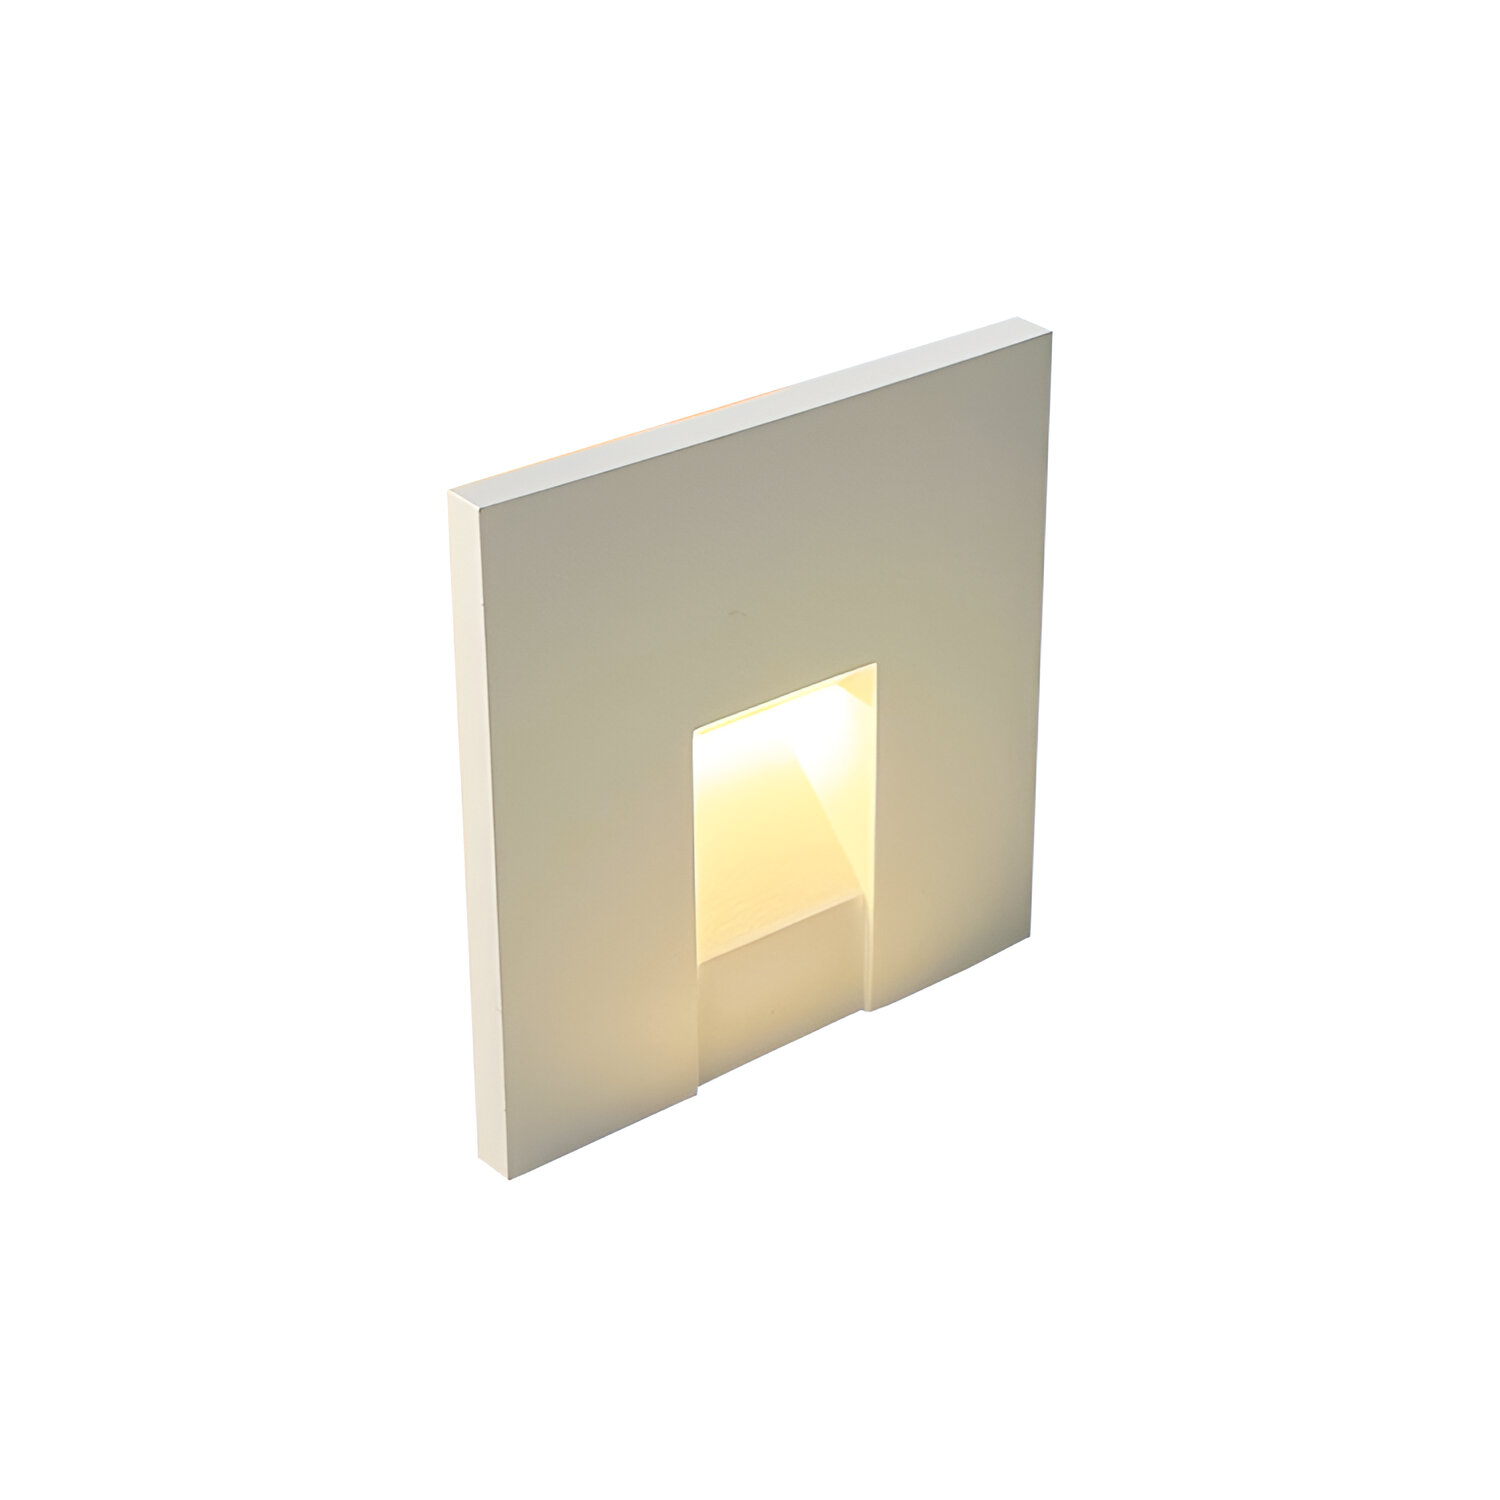 Product image of Magna LED Stair Light Square White with Light On